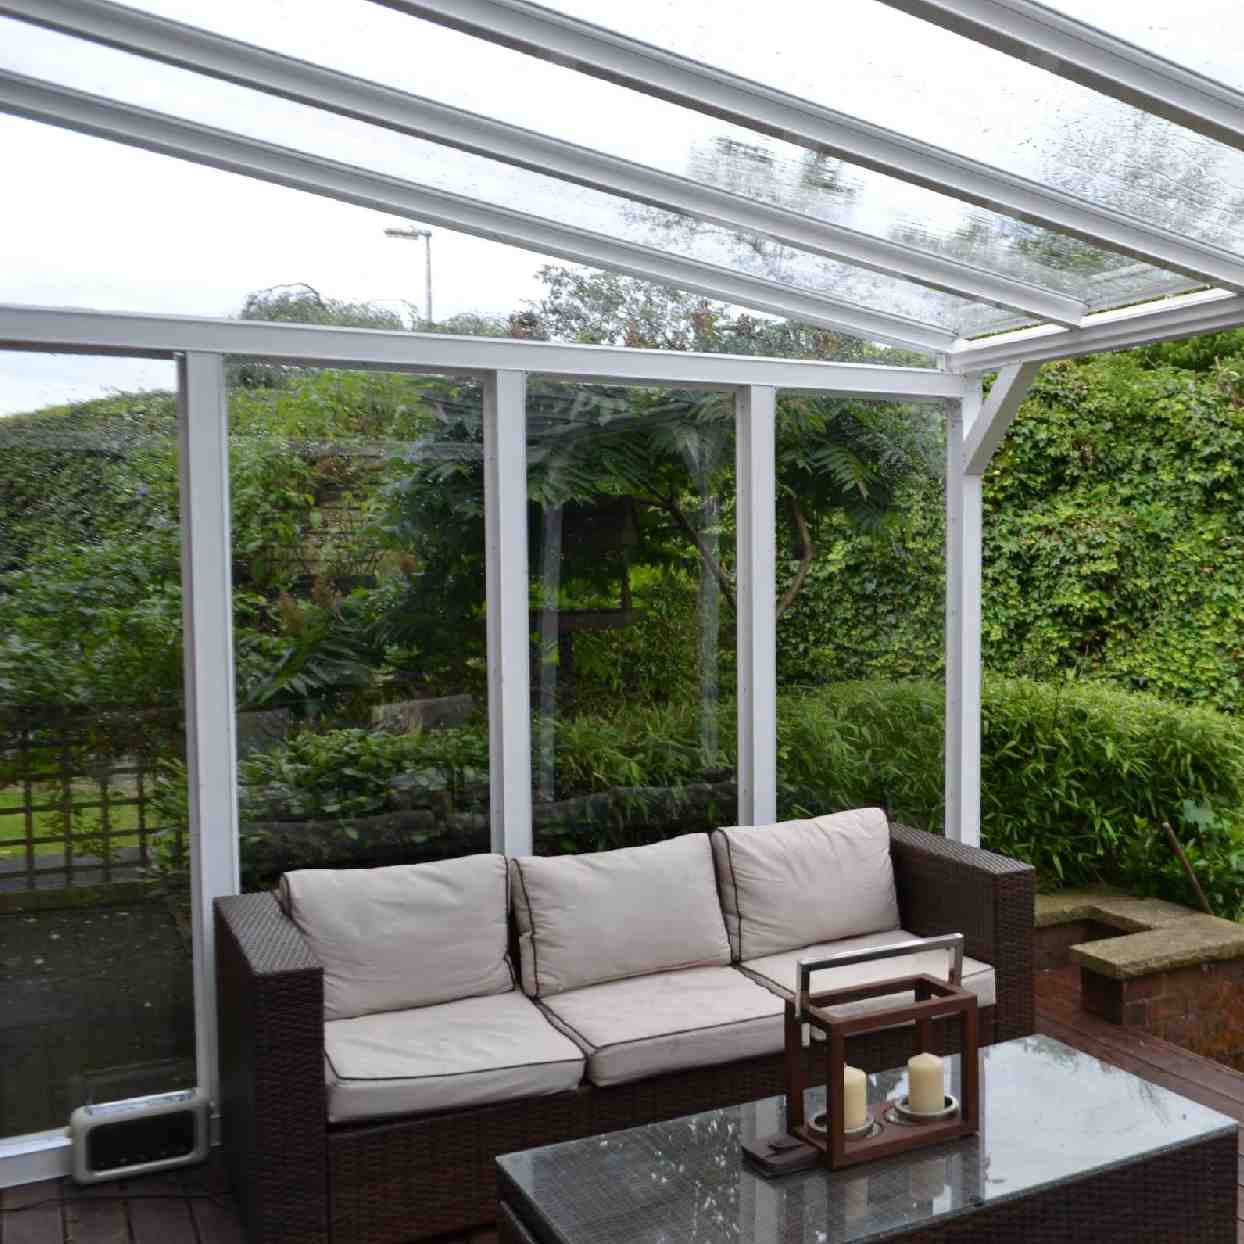 Buy Omega Verandah White with 16mm Polycarbonate Glazing - 11.8m (W) x 4.5m (P), (5) Supporting Posts online today